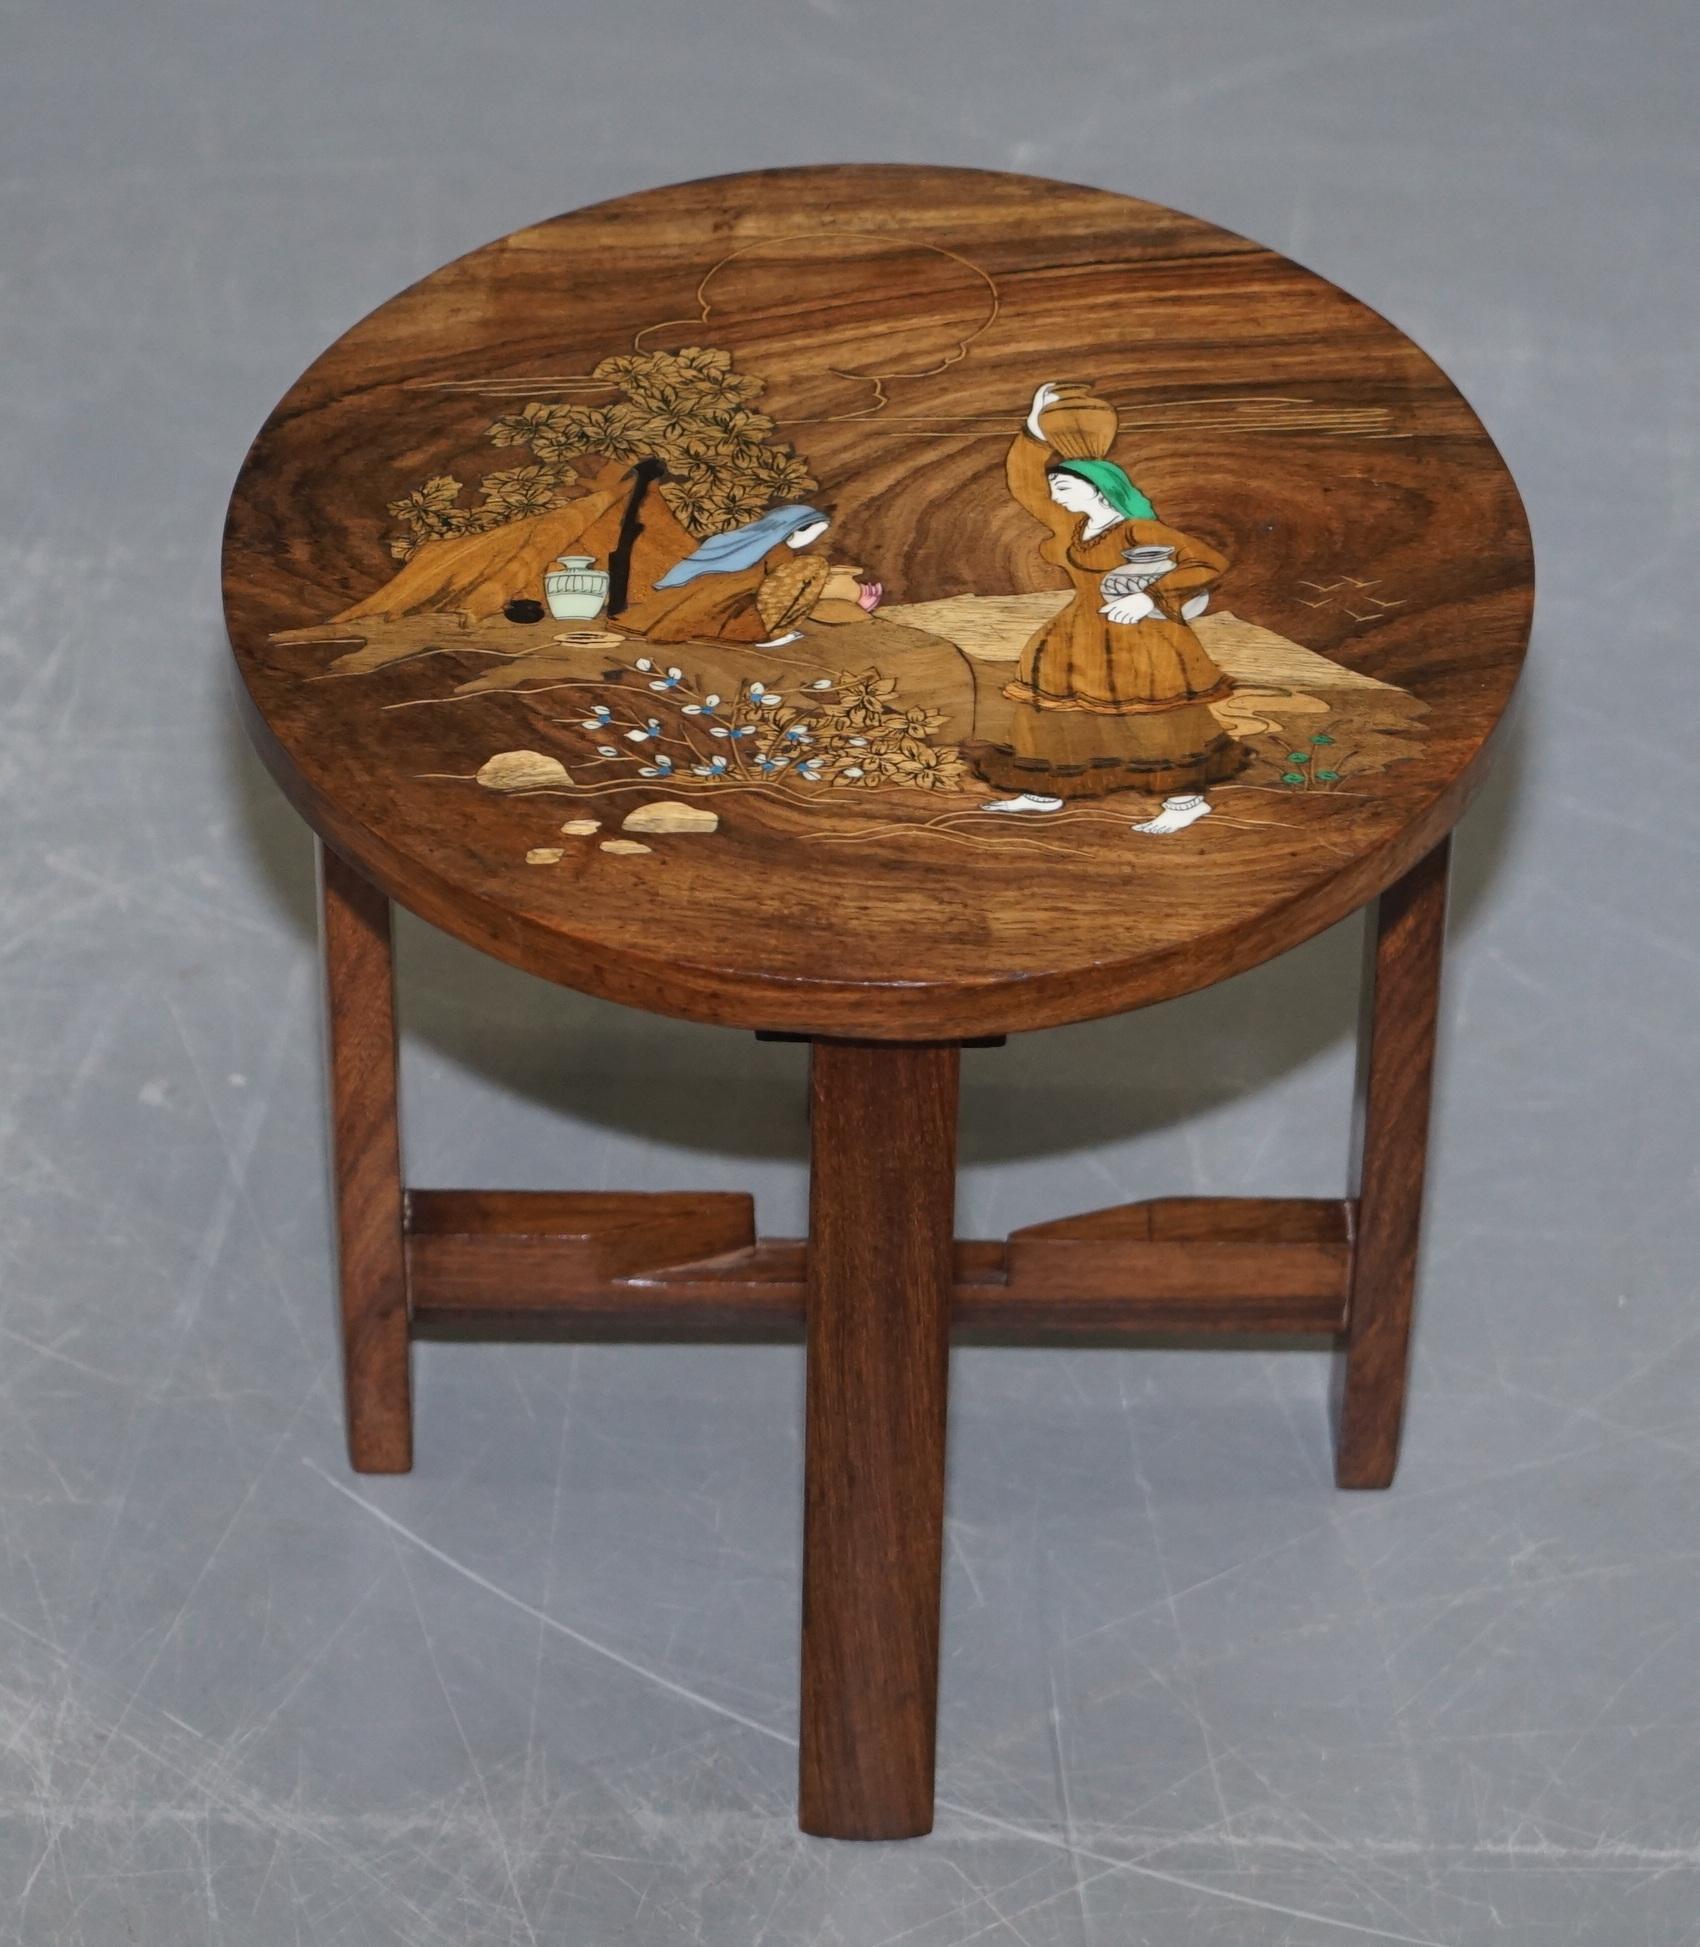 We are delighted to offer for sale this stunning antique Japanese Shibayyama inlaid side table depicting ladies colleting water with large jugs

This table is sublime, absolutely exquisite from every angle, circa 1900, hand made in Japan, I have